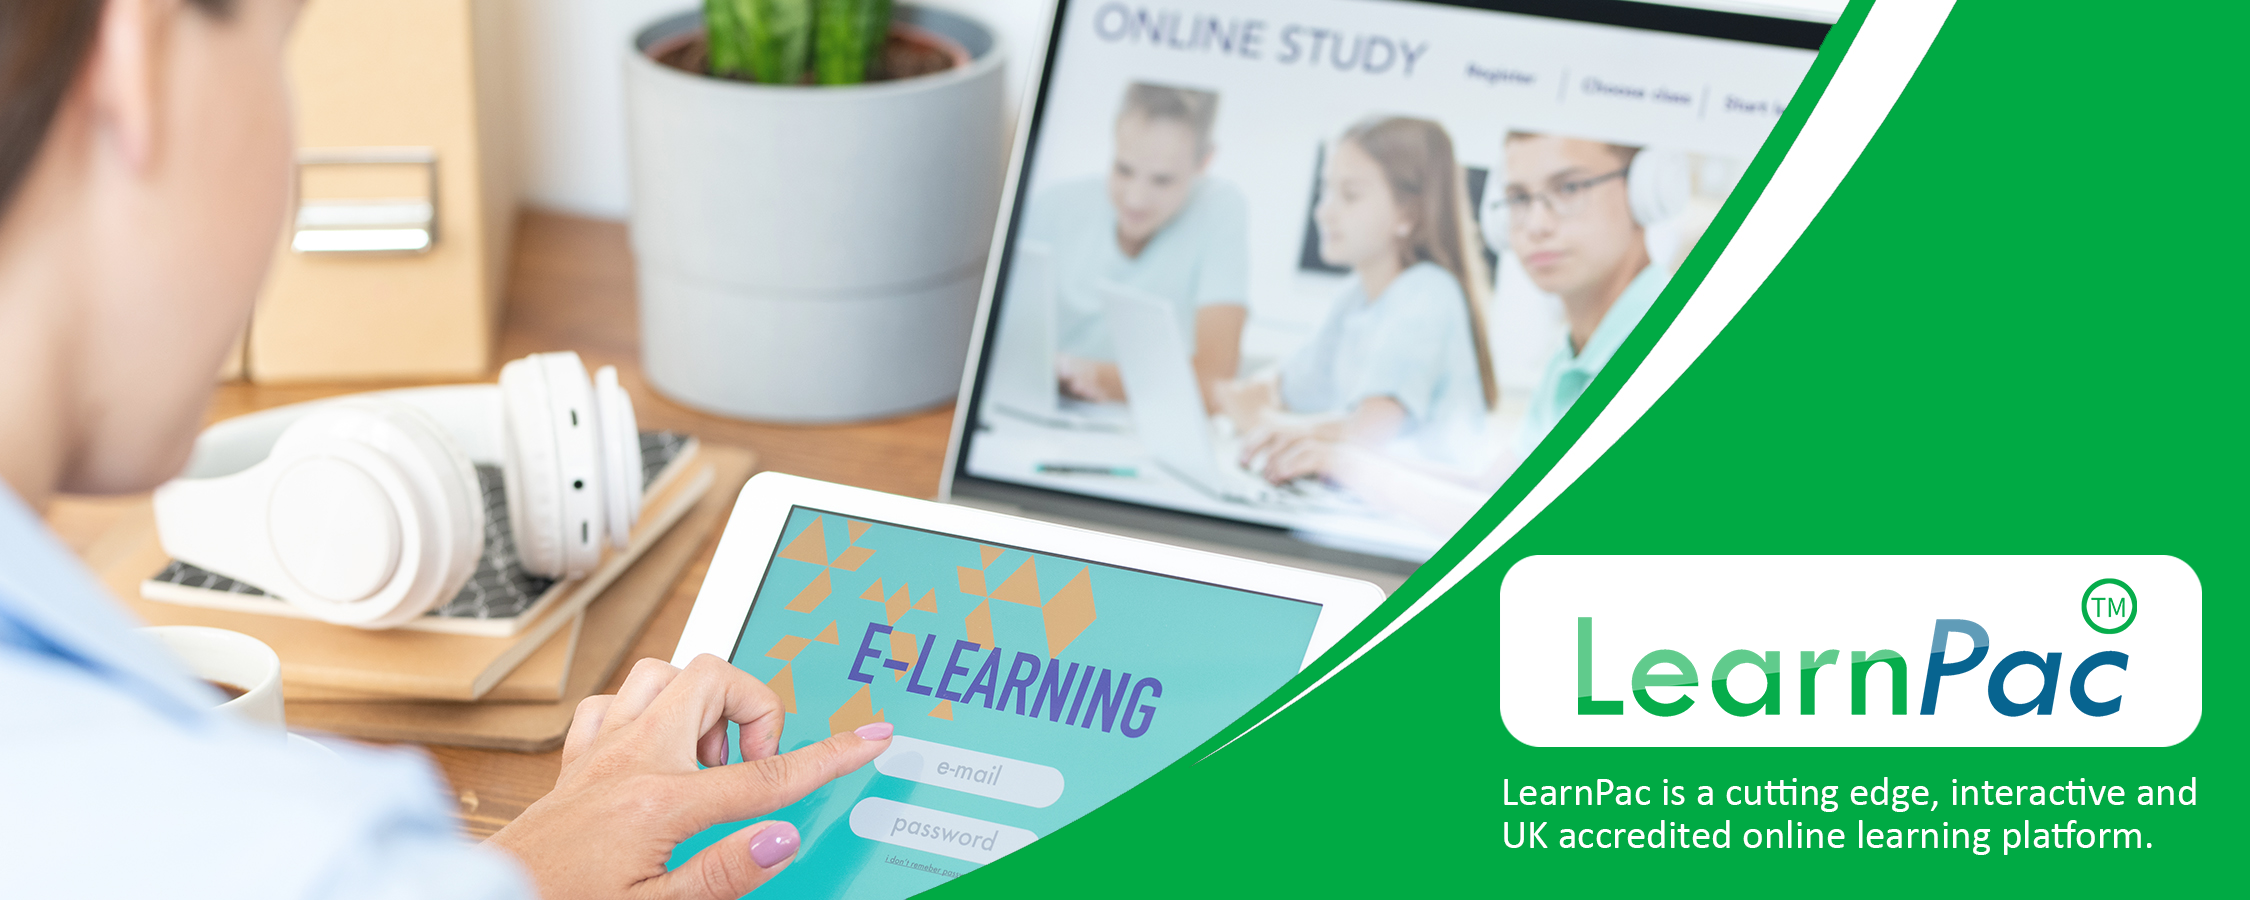 Collaborate with Other Departments - E-Learning Courses - LearnPac Systems UK -